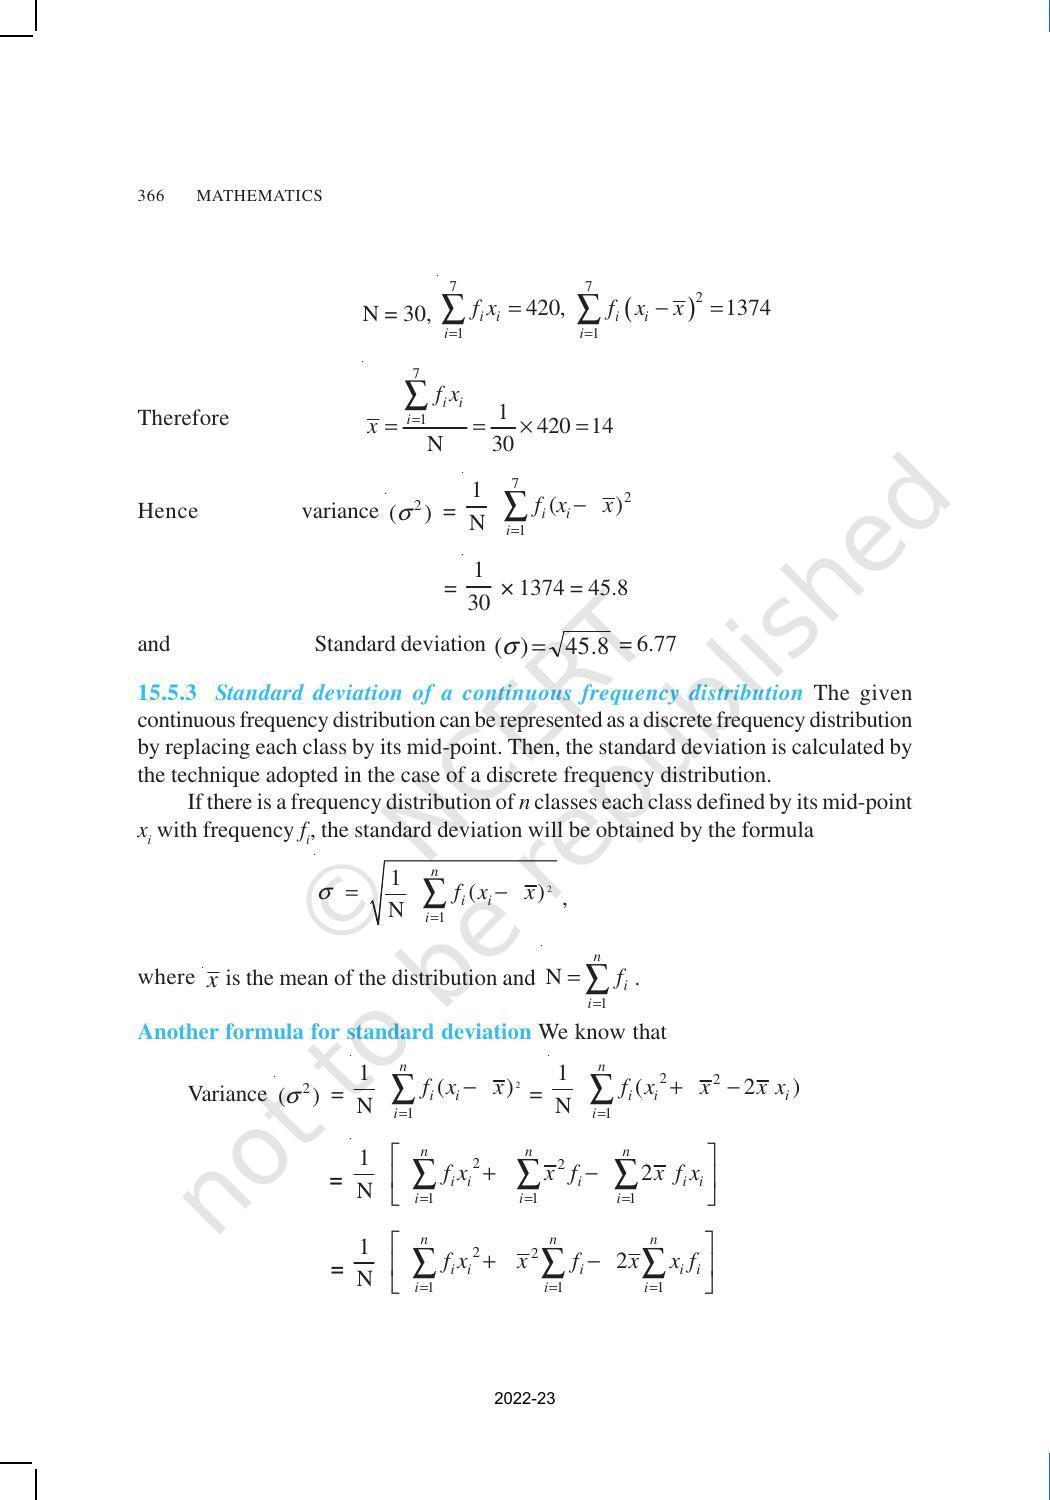 NCERT Book for Class 11 Maths Chapter 16 Probability - Page 20